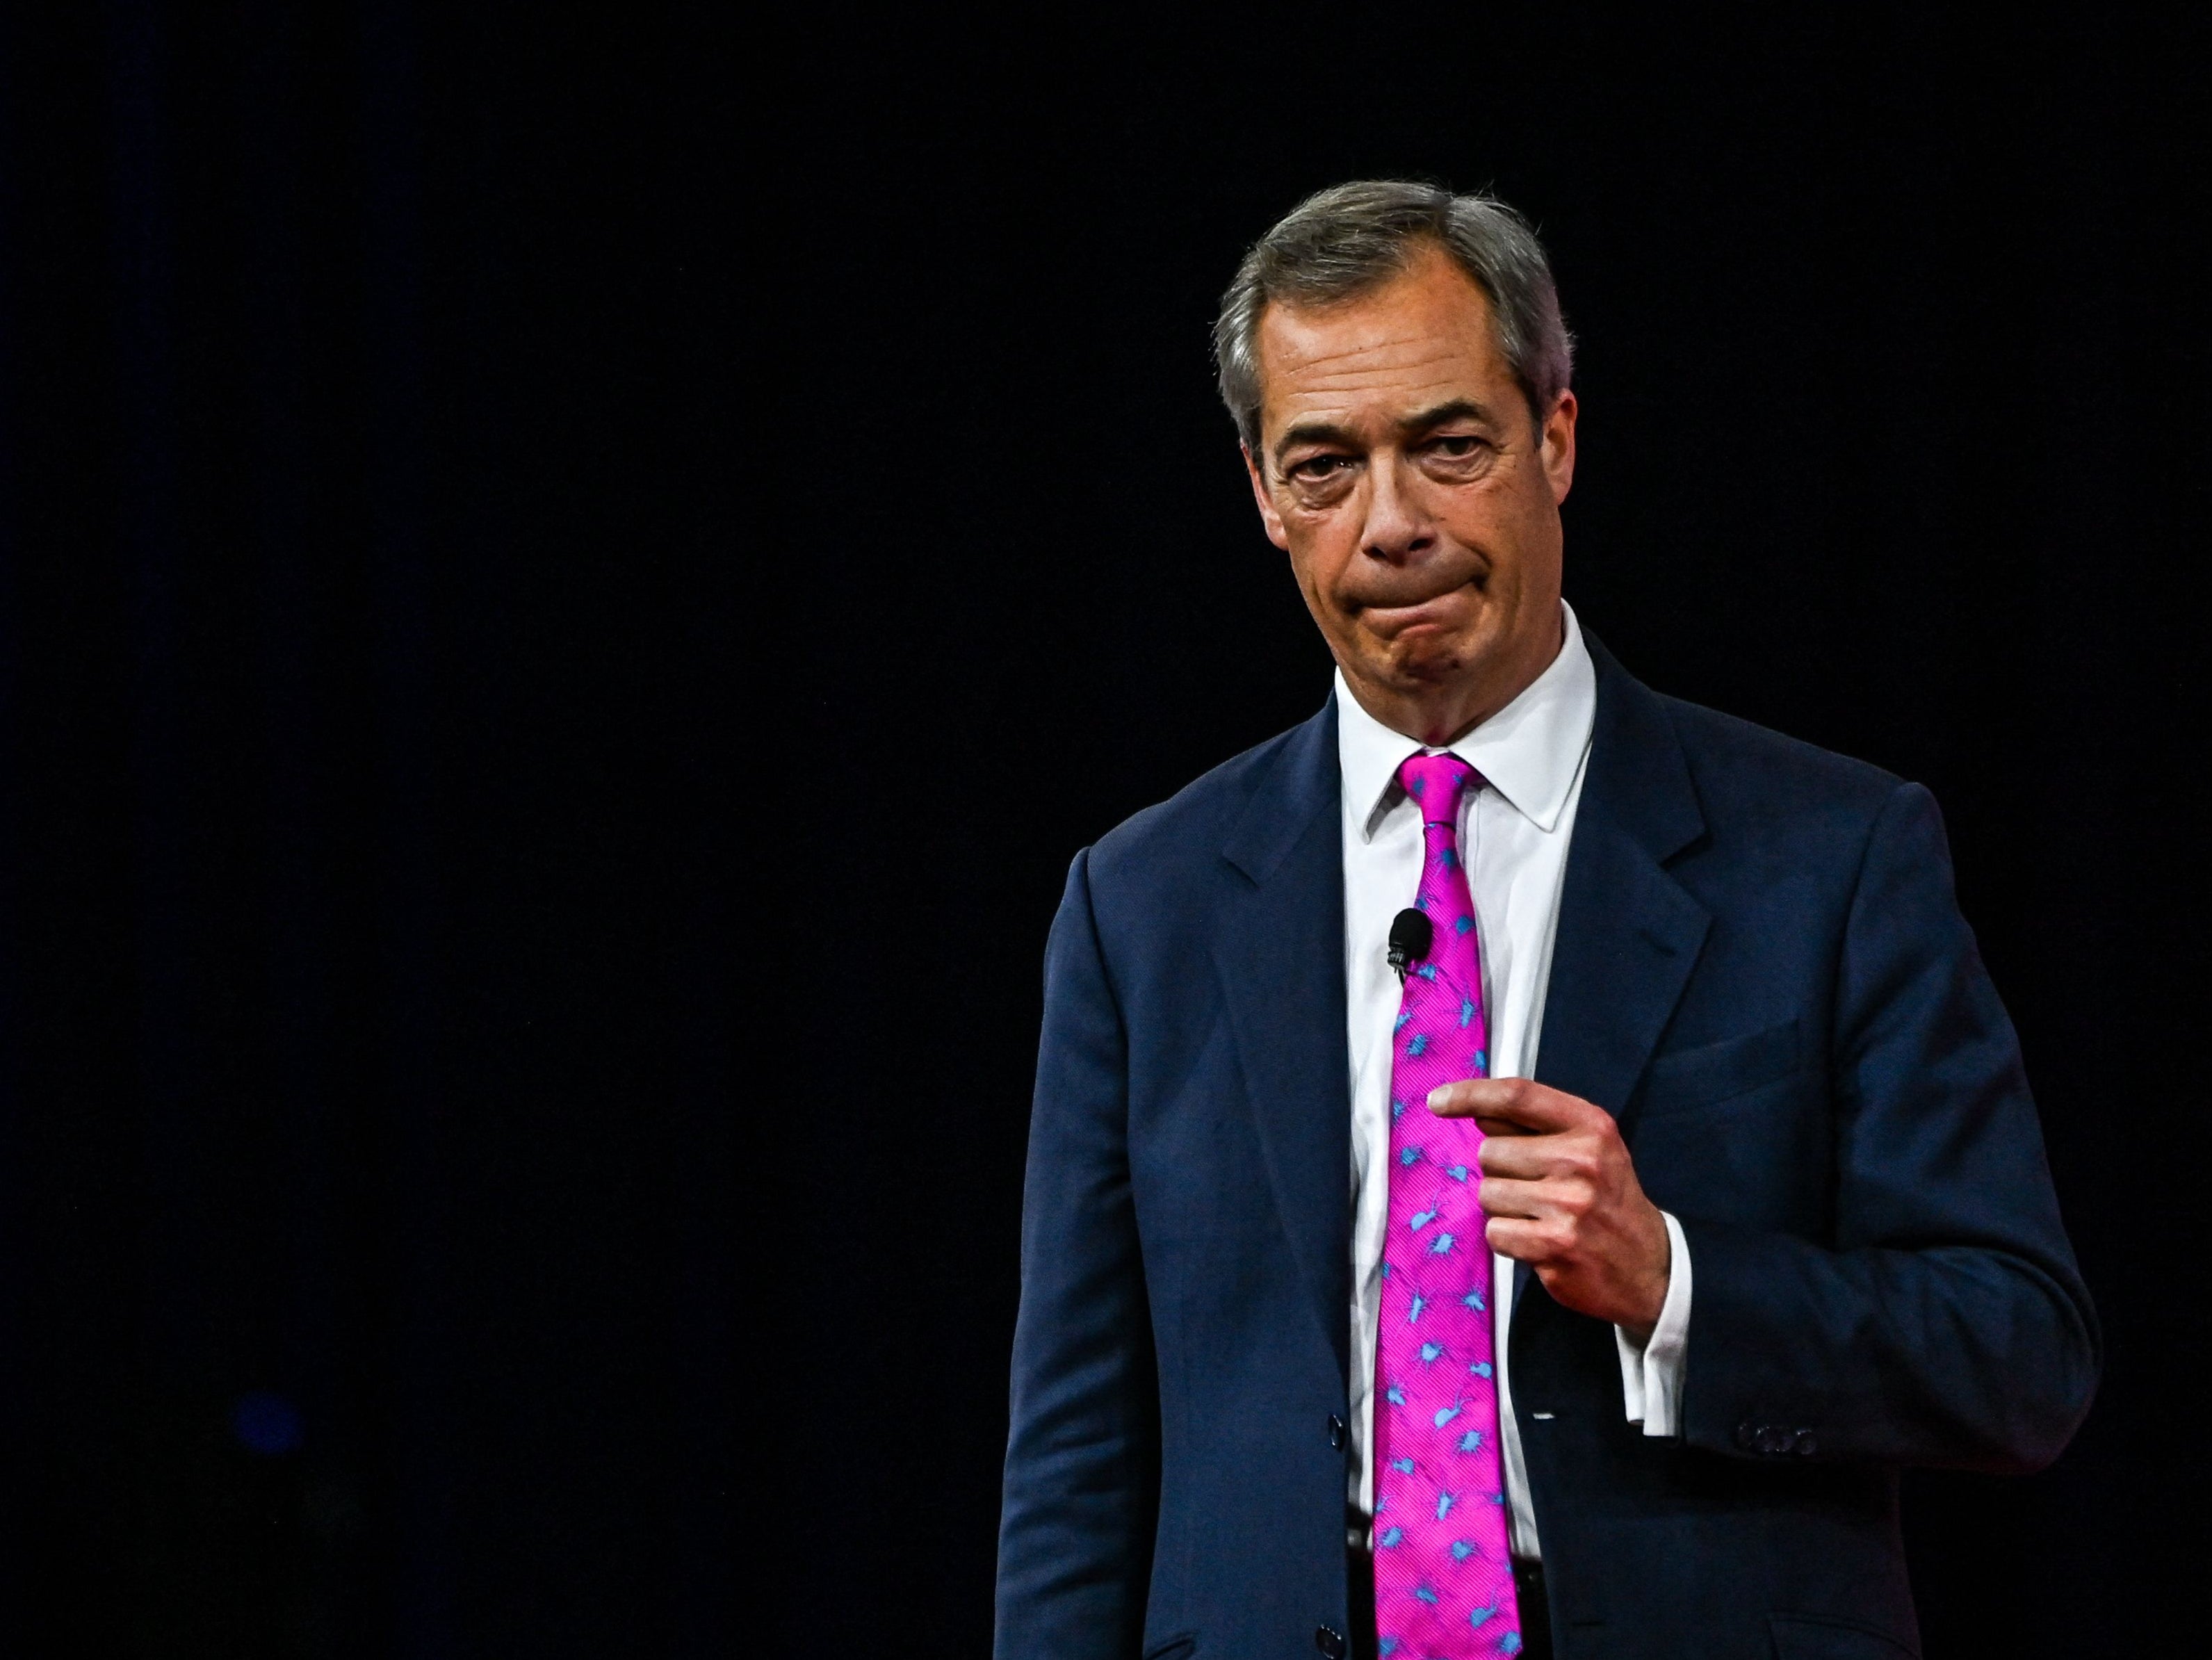 Nigel Farage has launched a new campaign calling for a referendum on UK net-zero goals